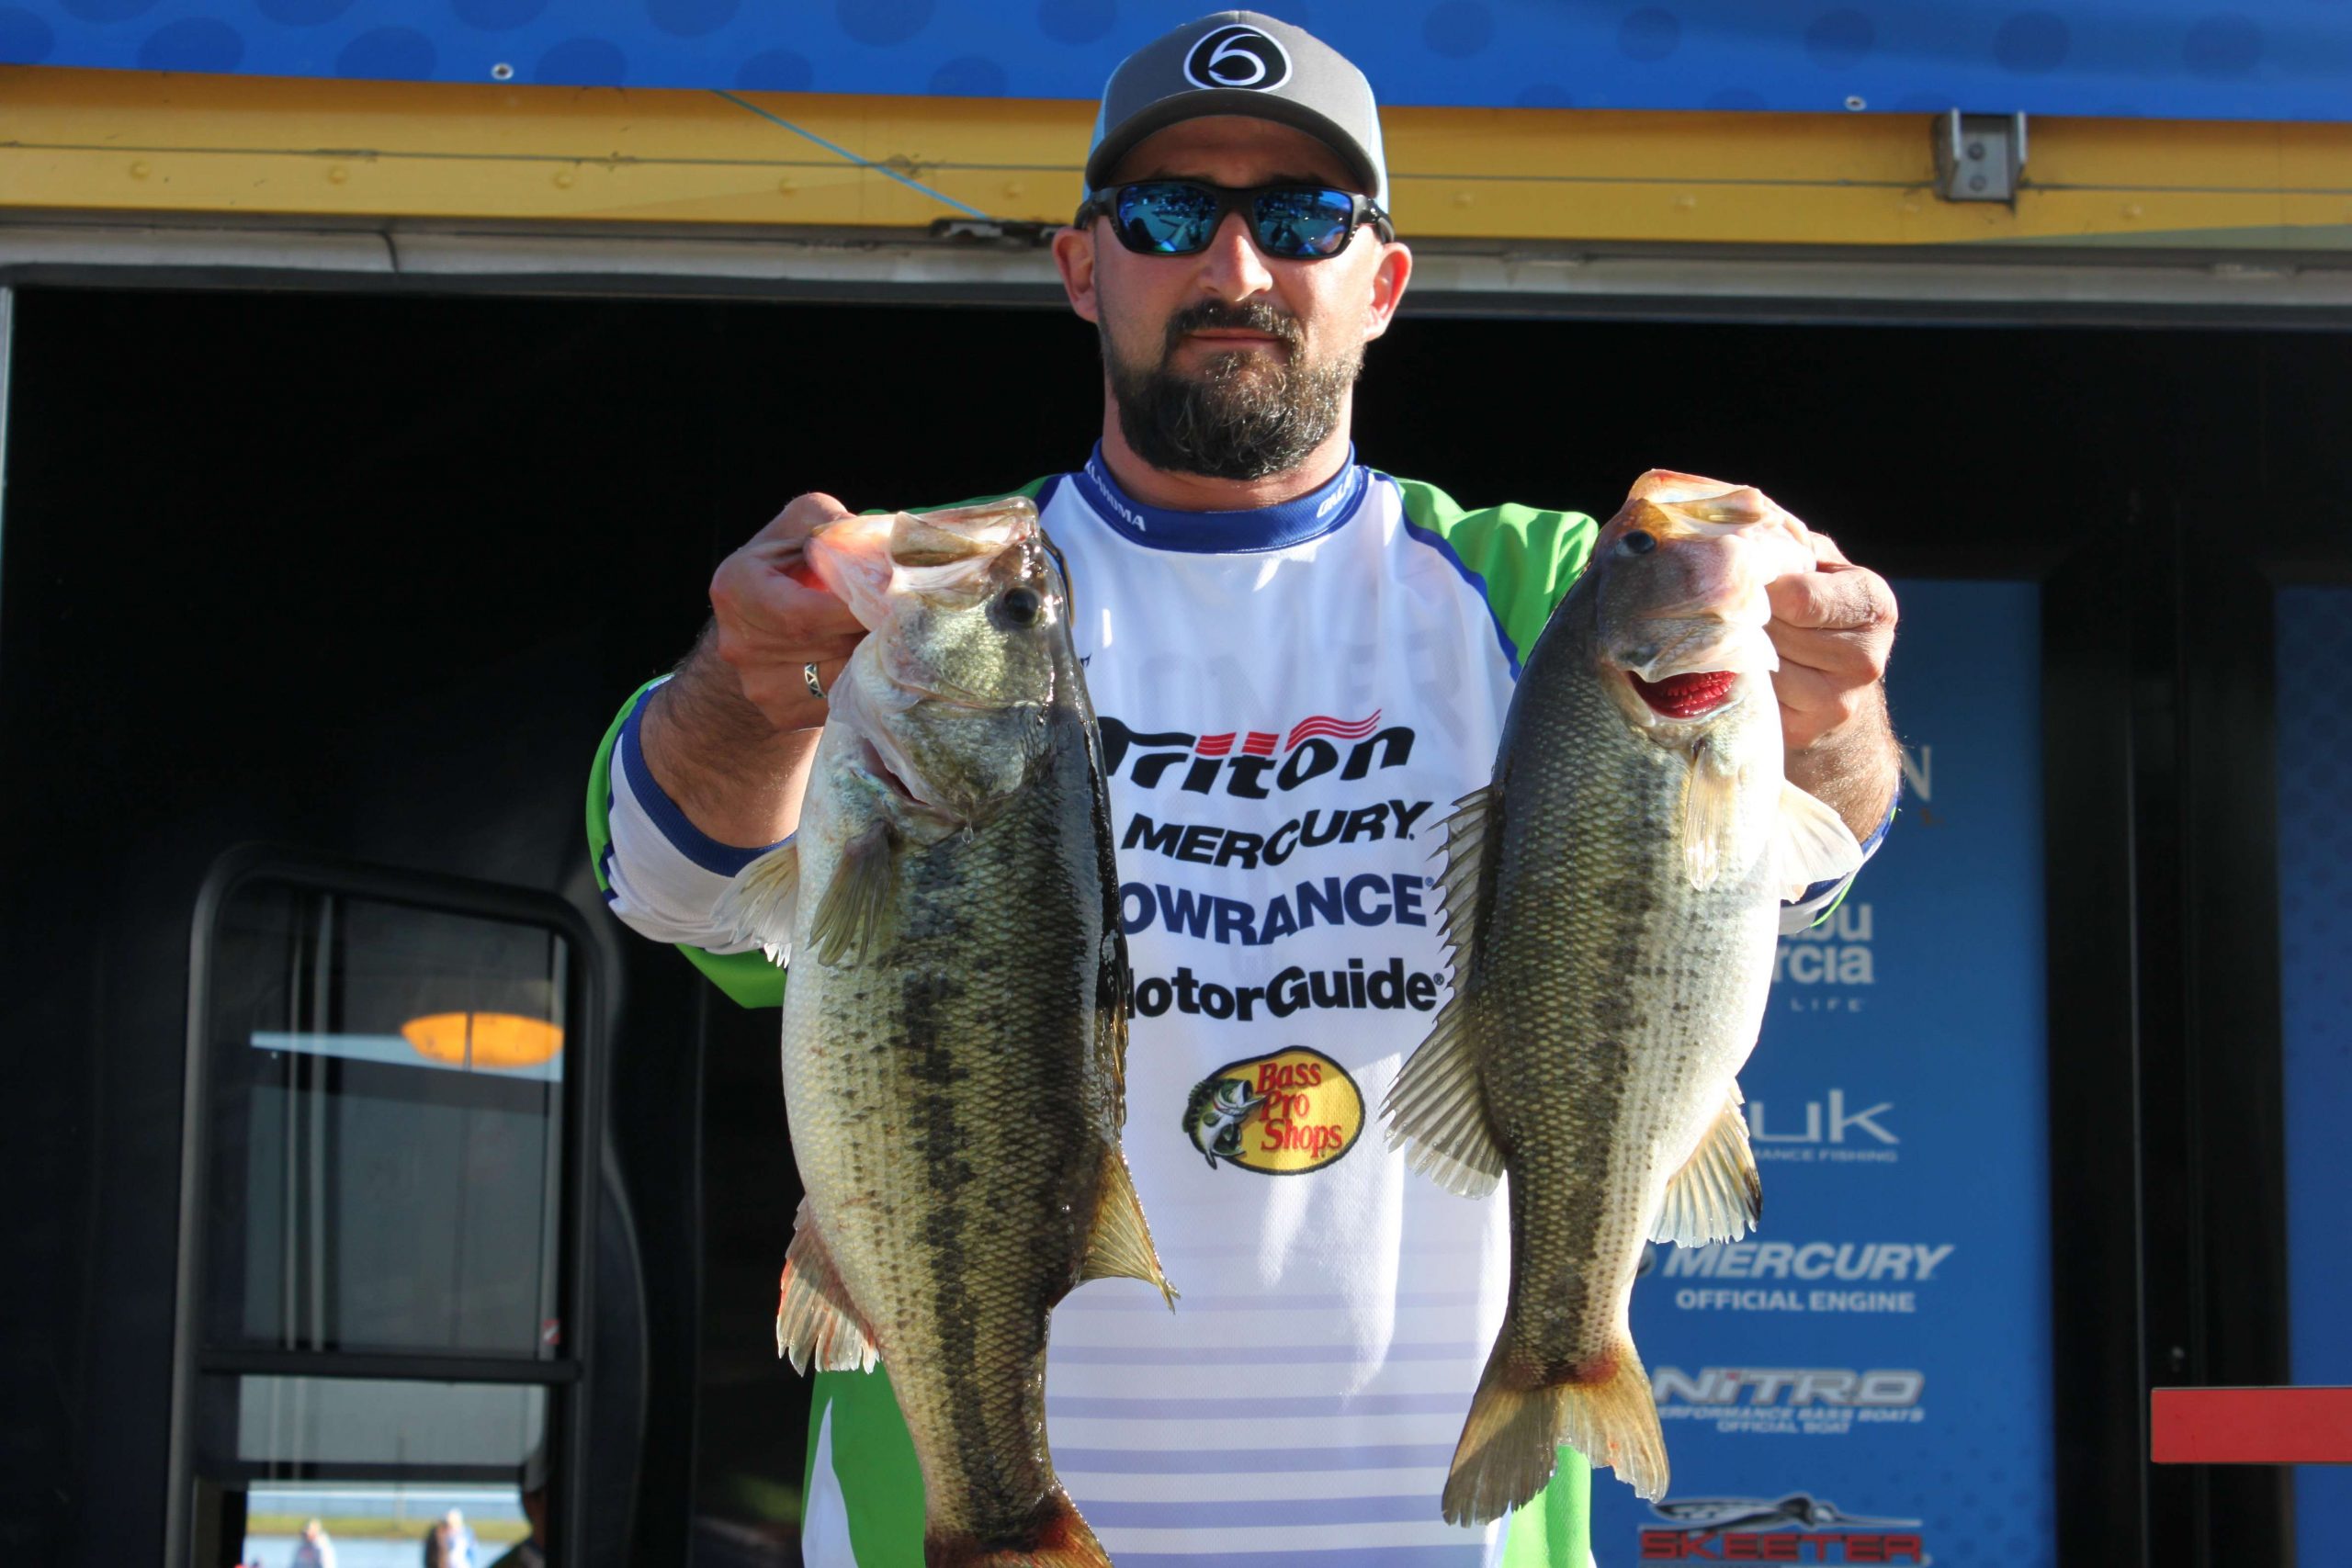  Tim Cartwright of Oklahoma is in sixth place among non-boaters with 20-6.
